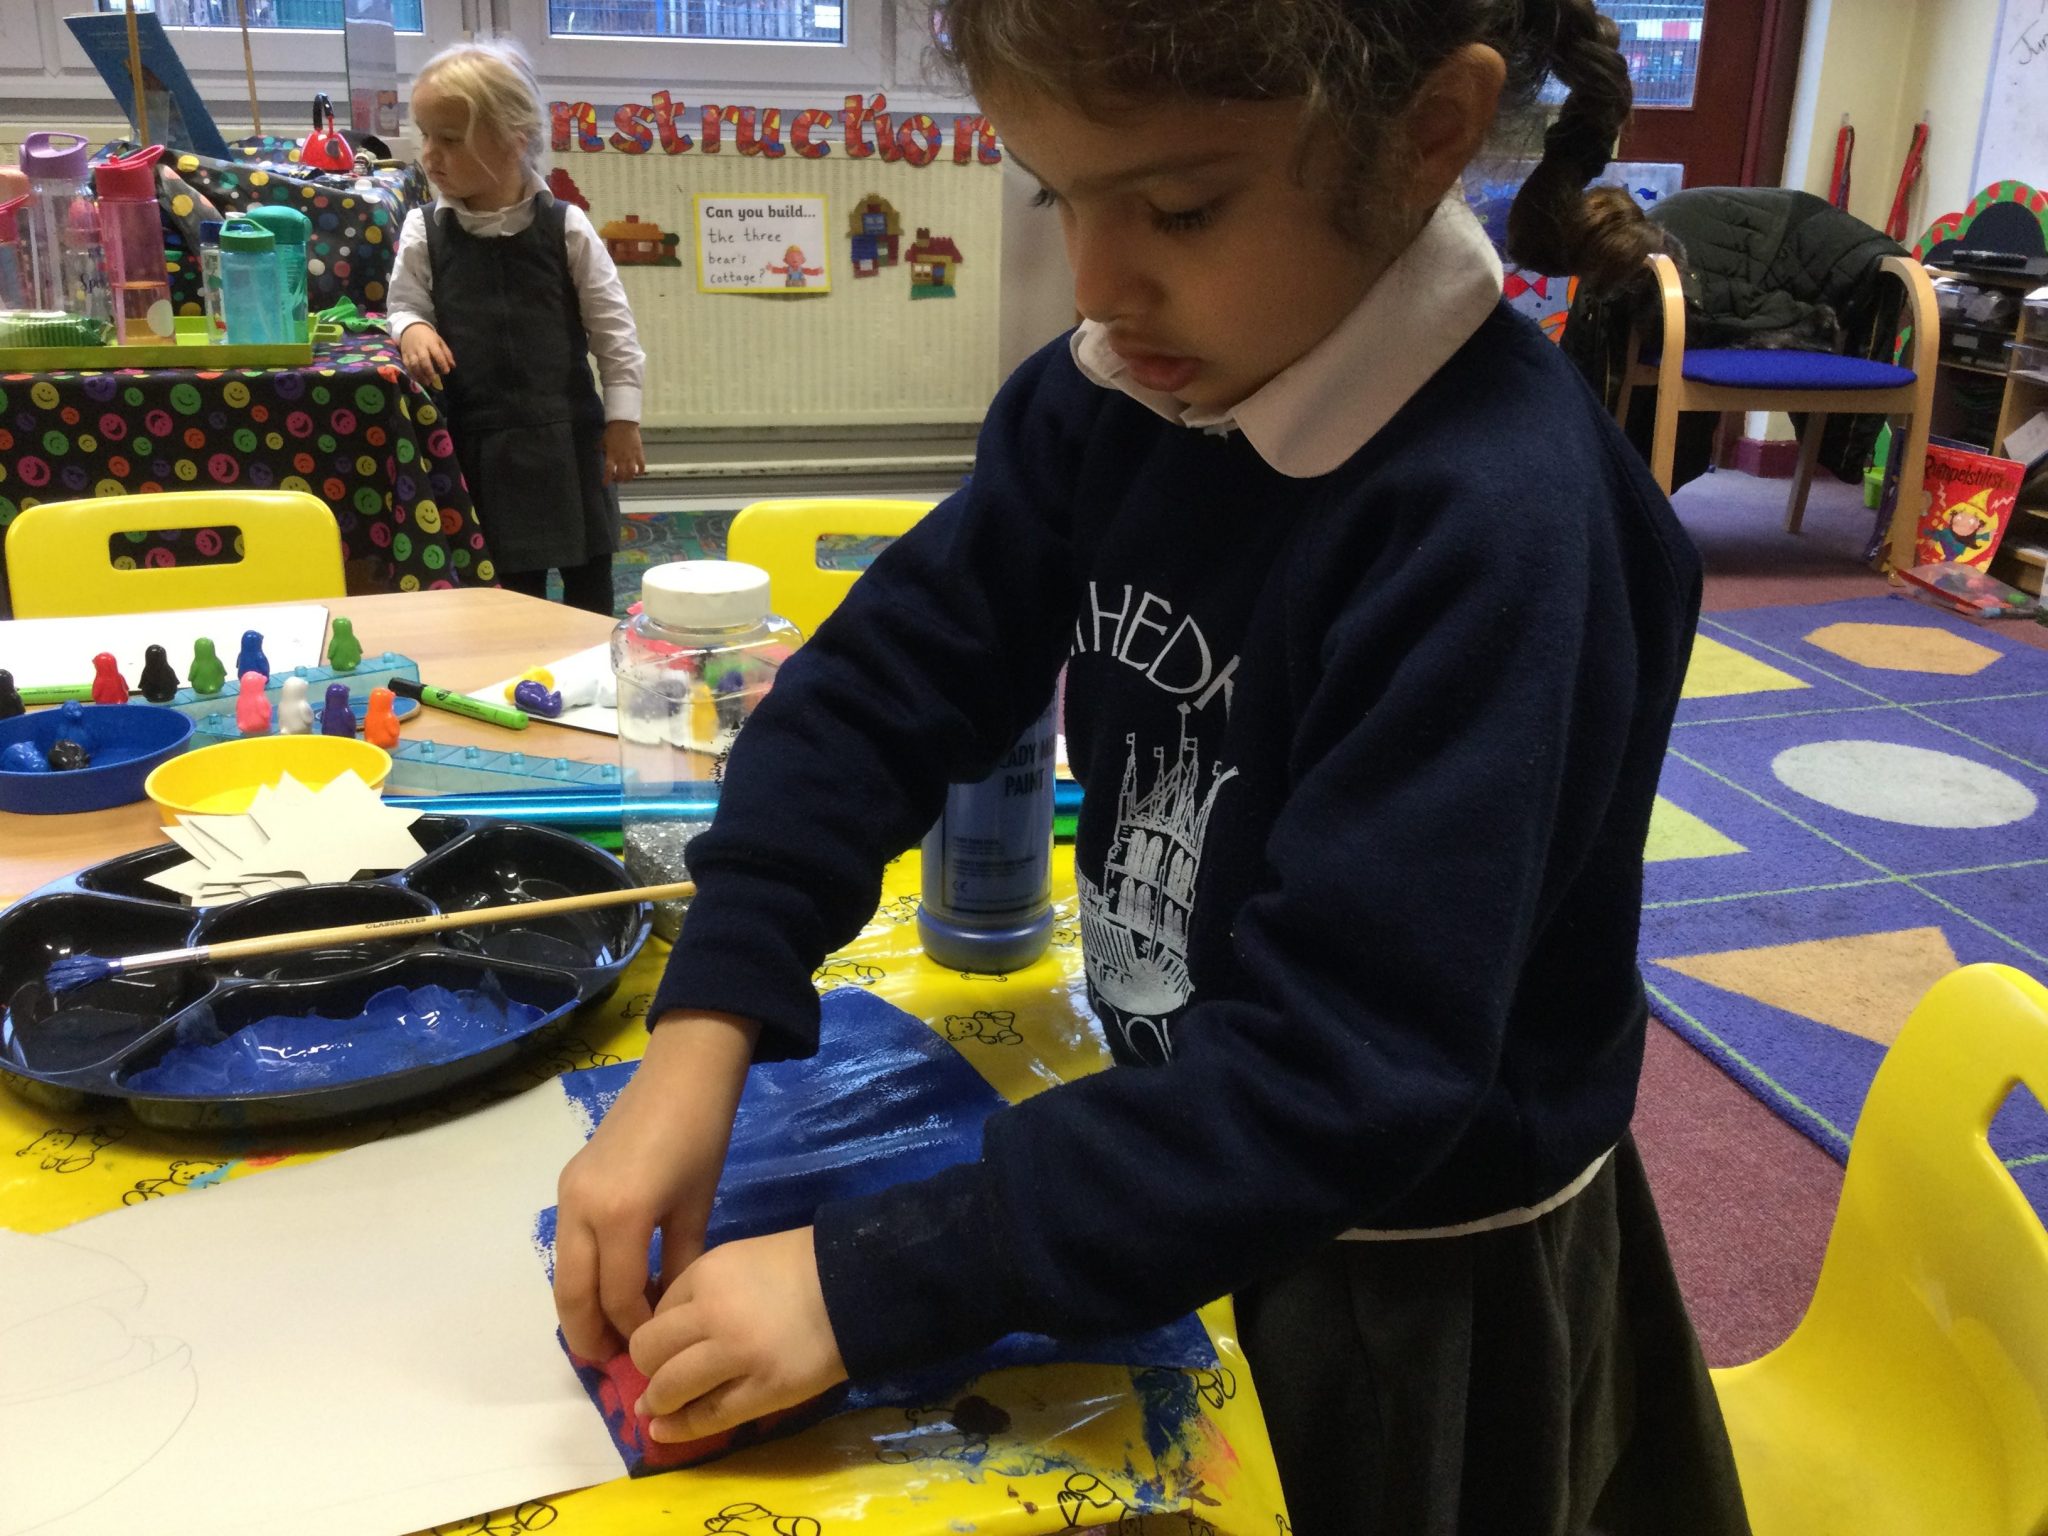 Nursery's Blog – The Blog of Cathedral Primary School's Nursery Class